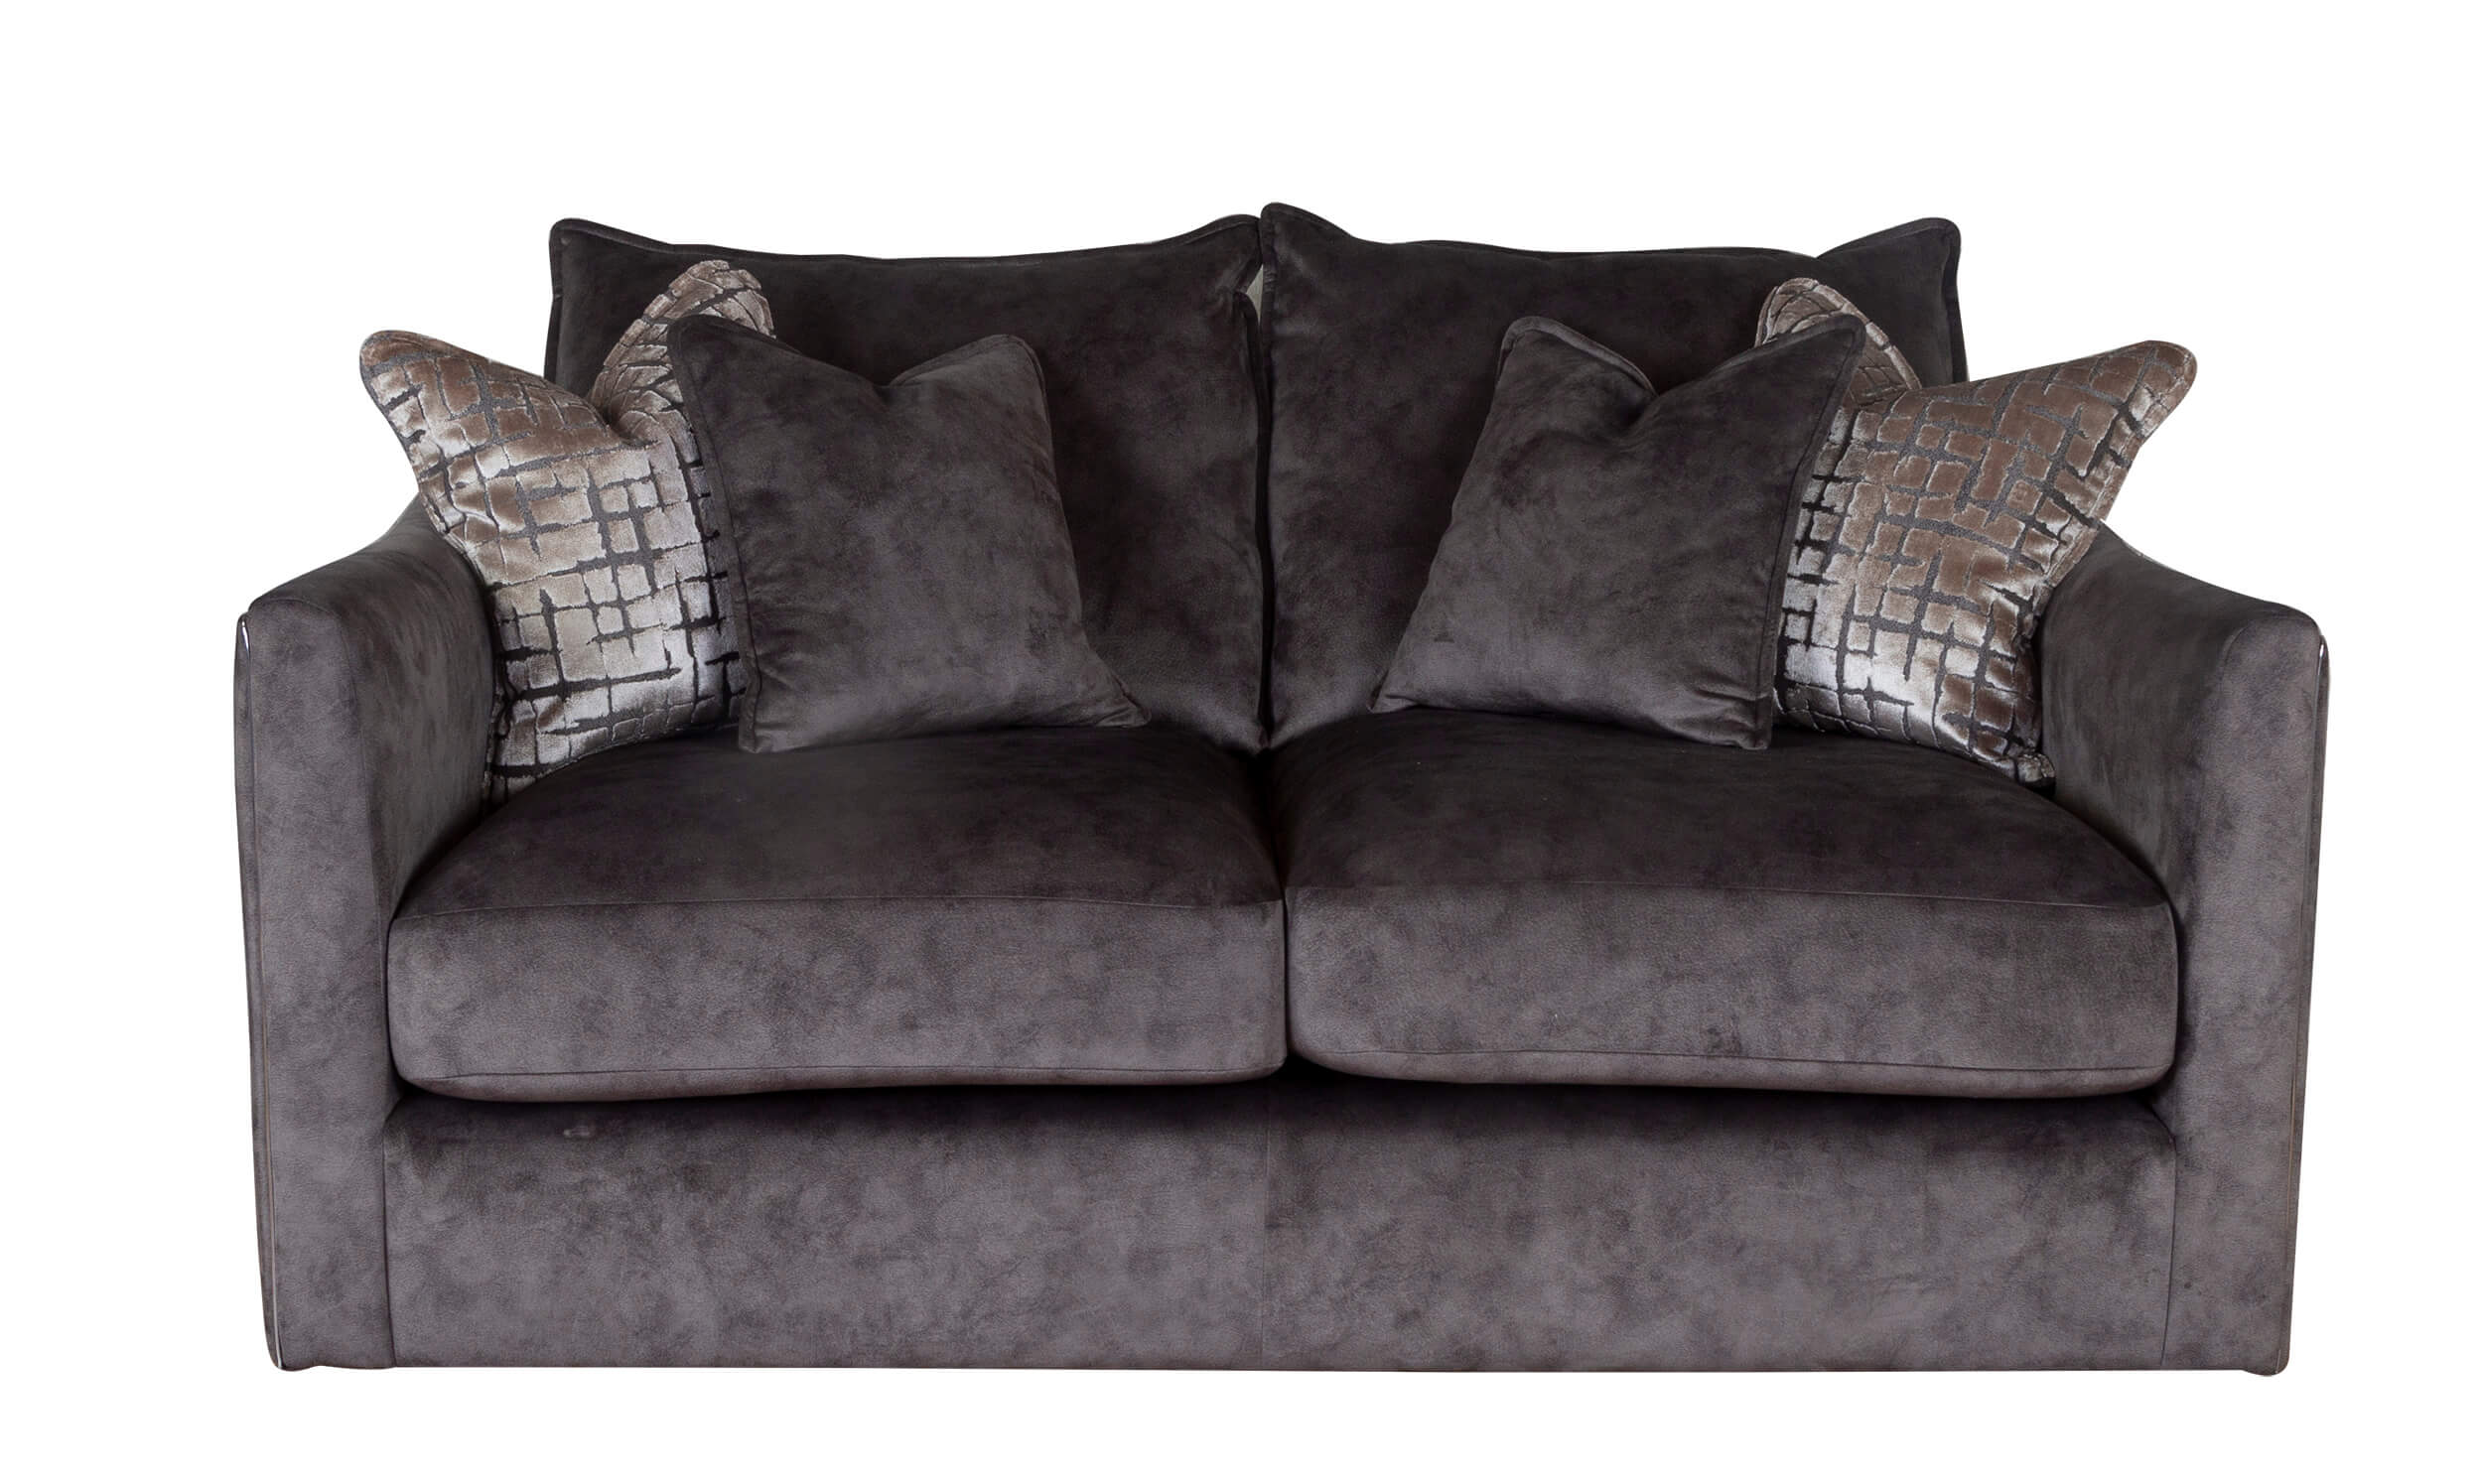 Showing image for Francesca 2-seater sofa